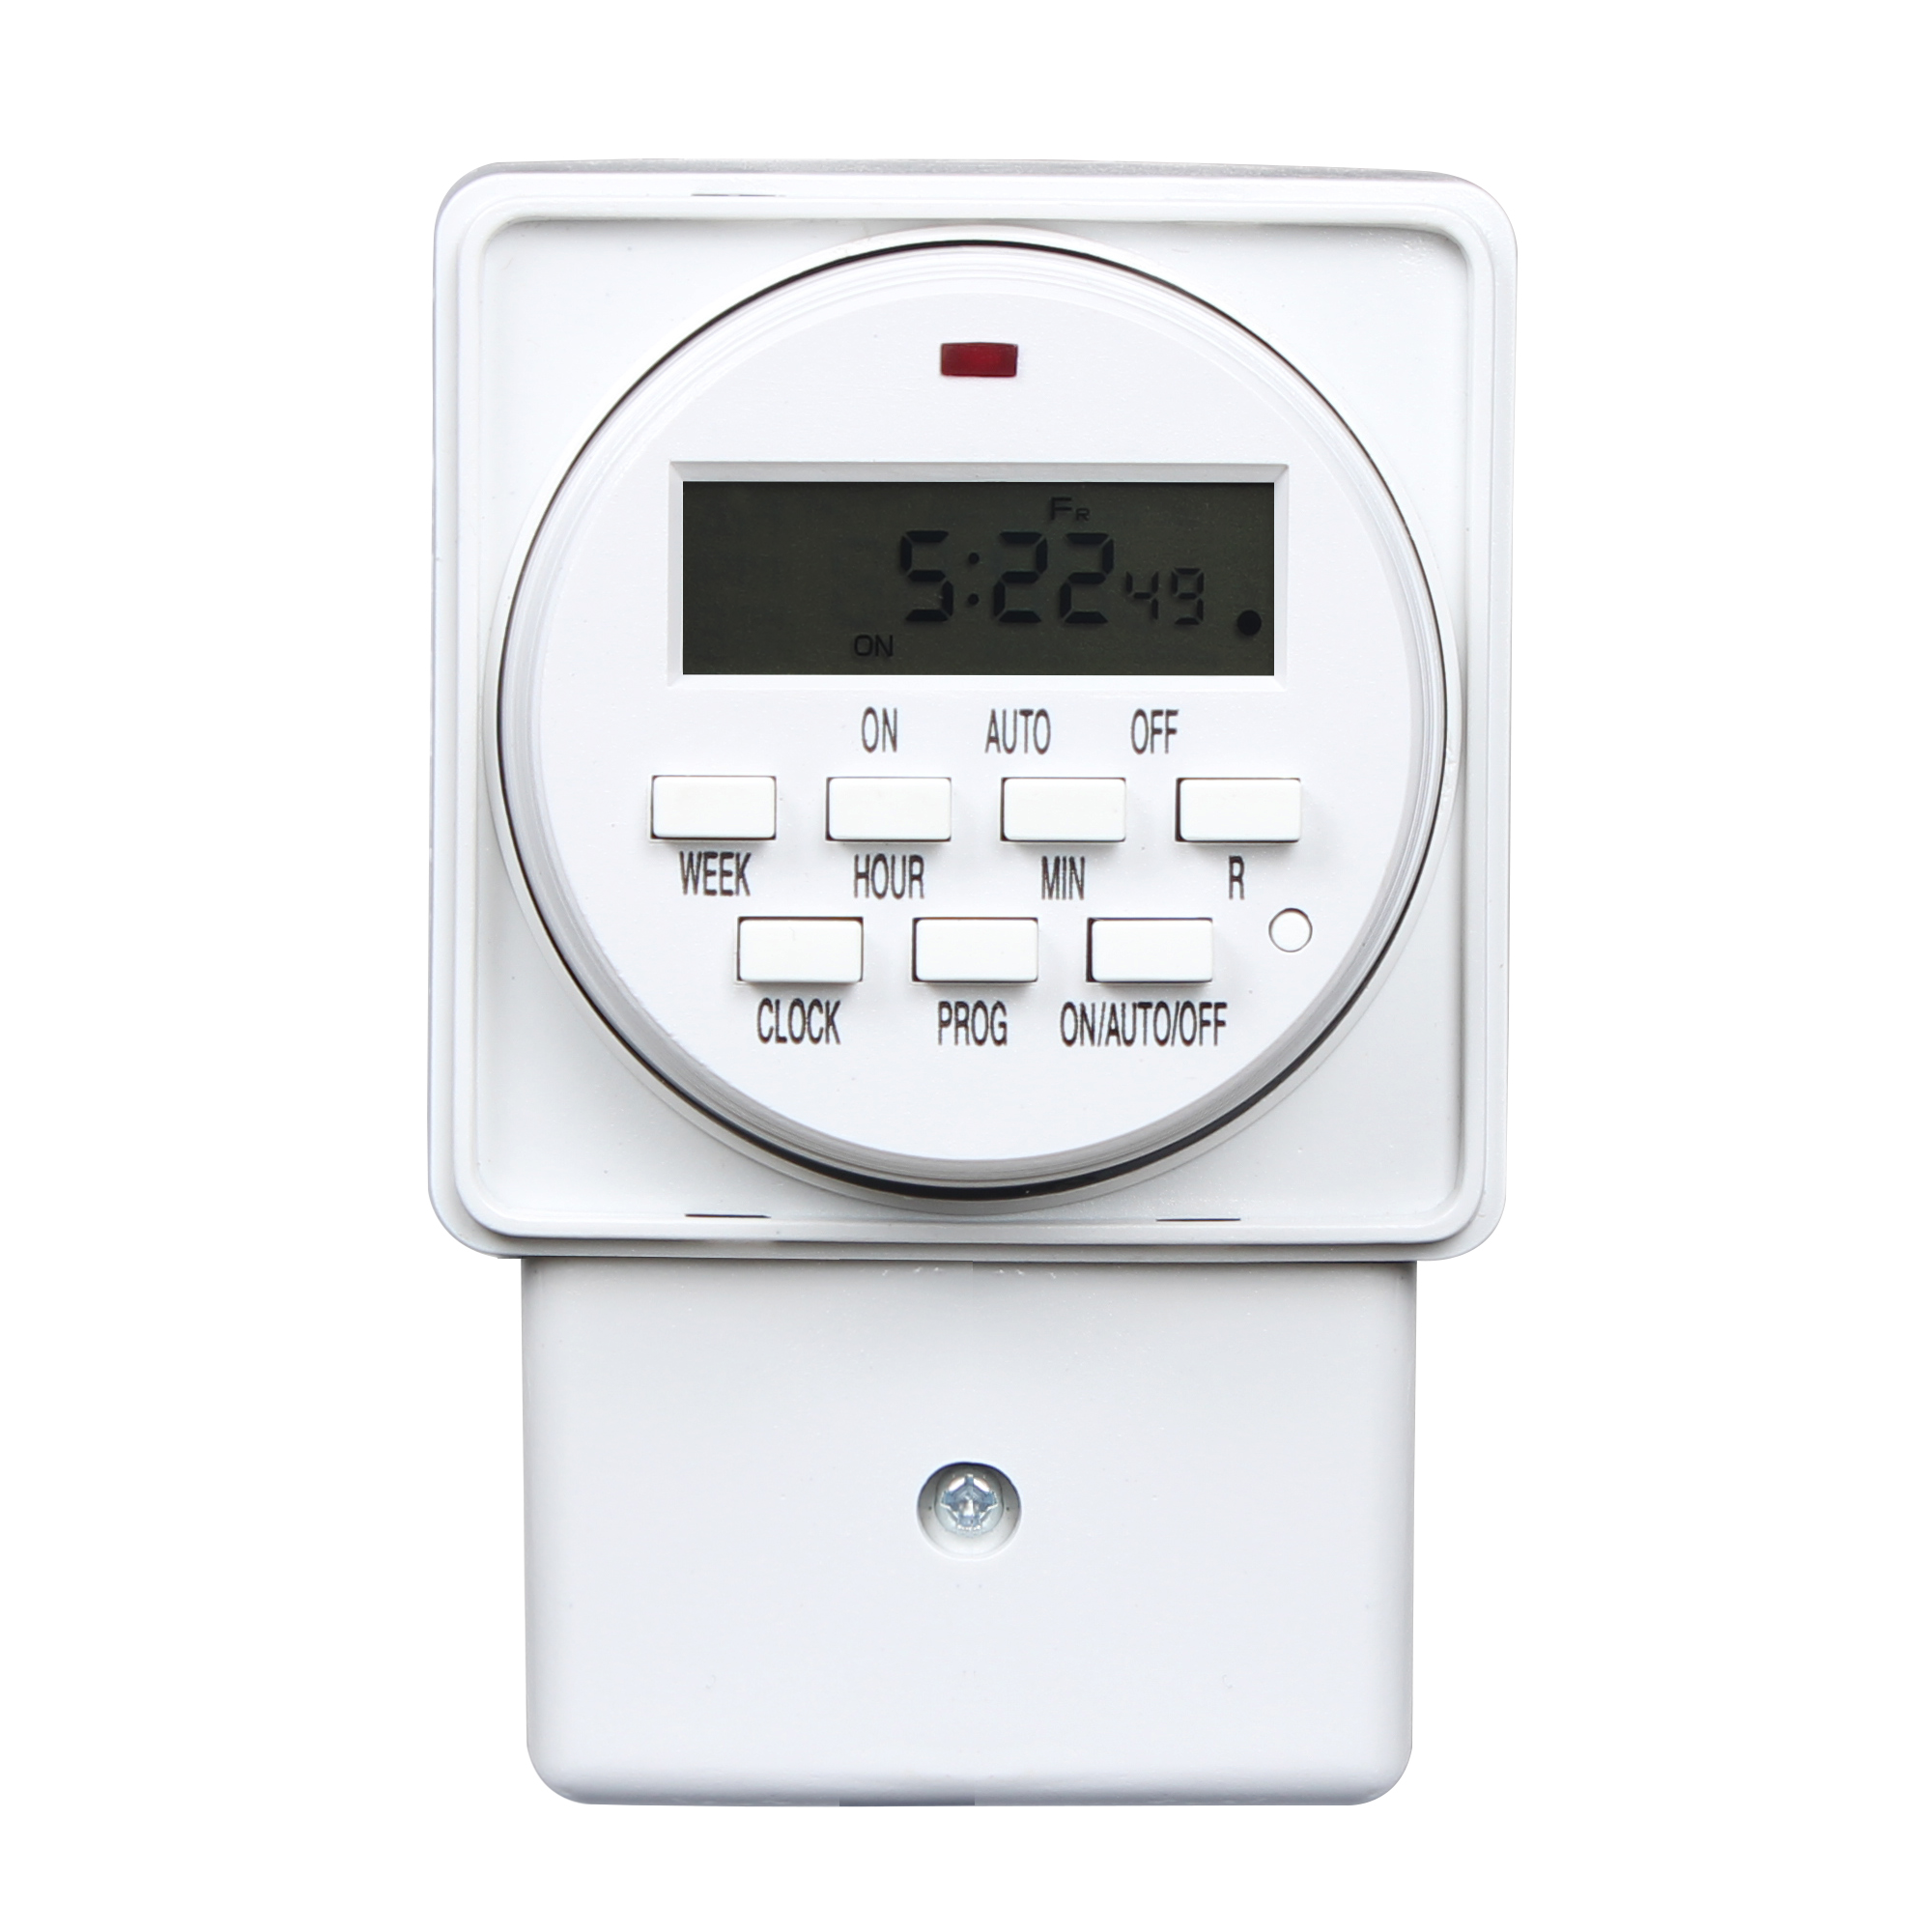 HBN Weekly Energy Saving Segment Electronic Wall-Mounted Timer, BND-50/SID1